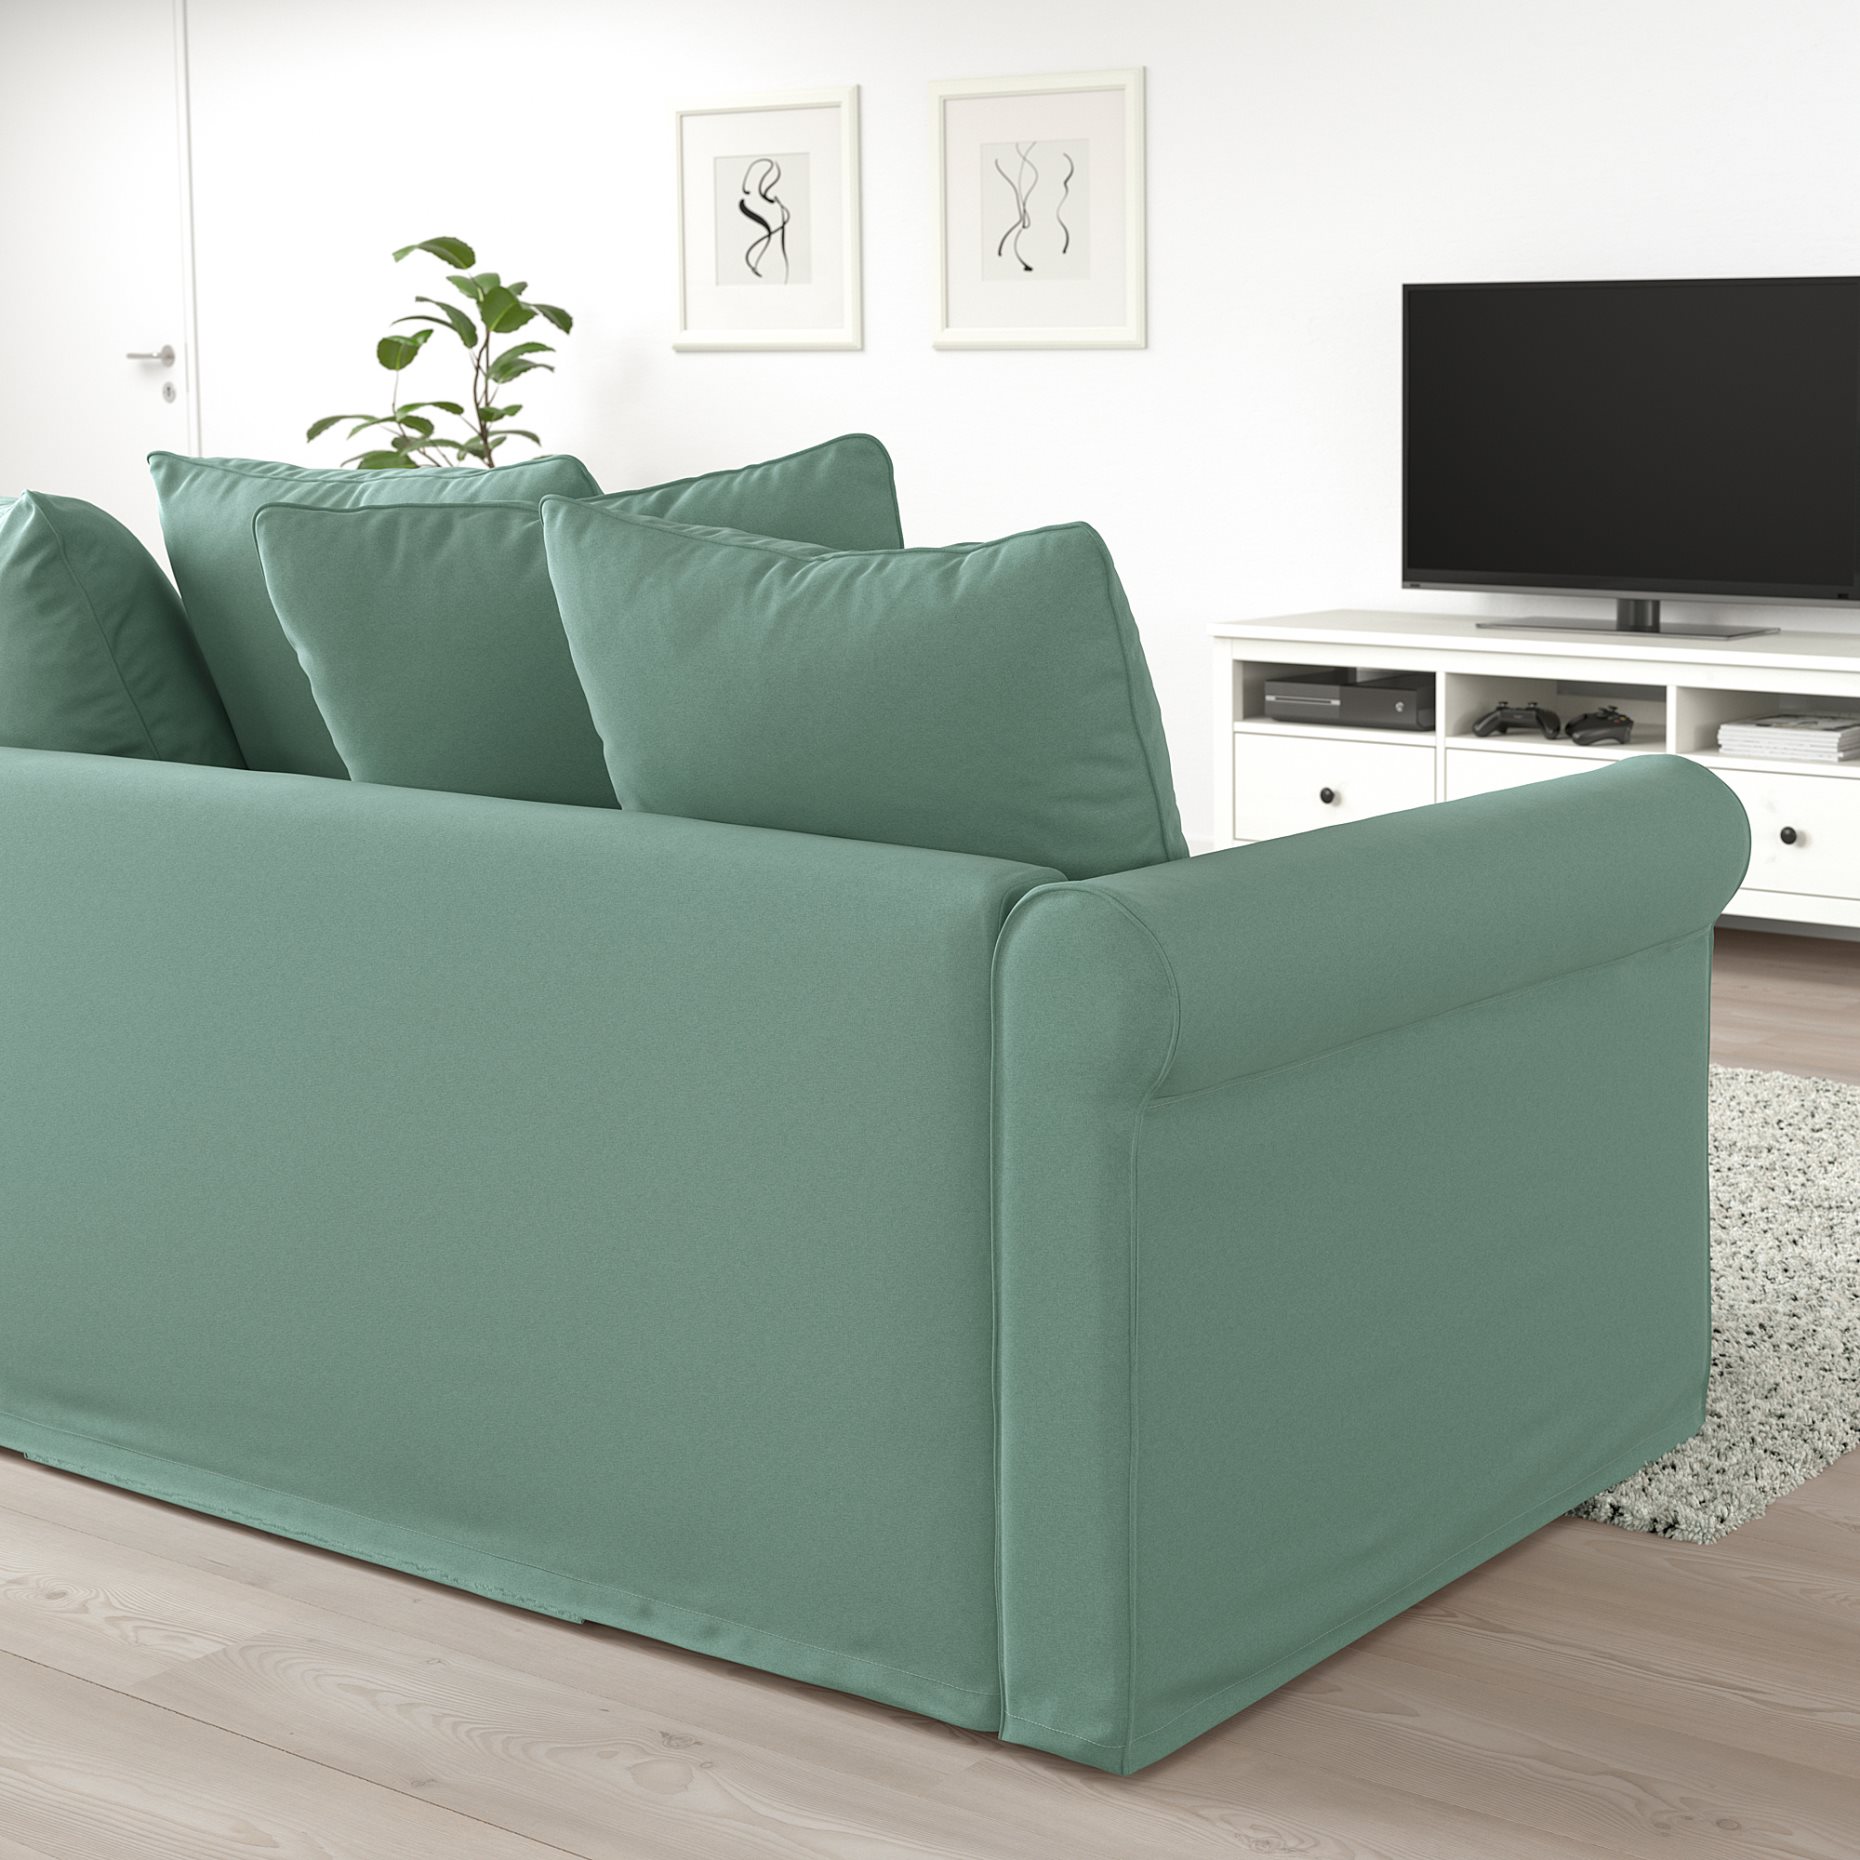 GRÖNLID, 3-seat sofa with chaise longue, 294.088.43